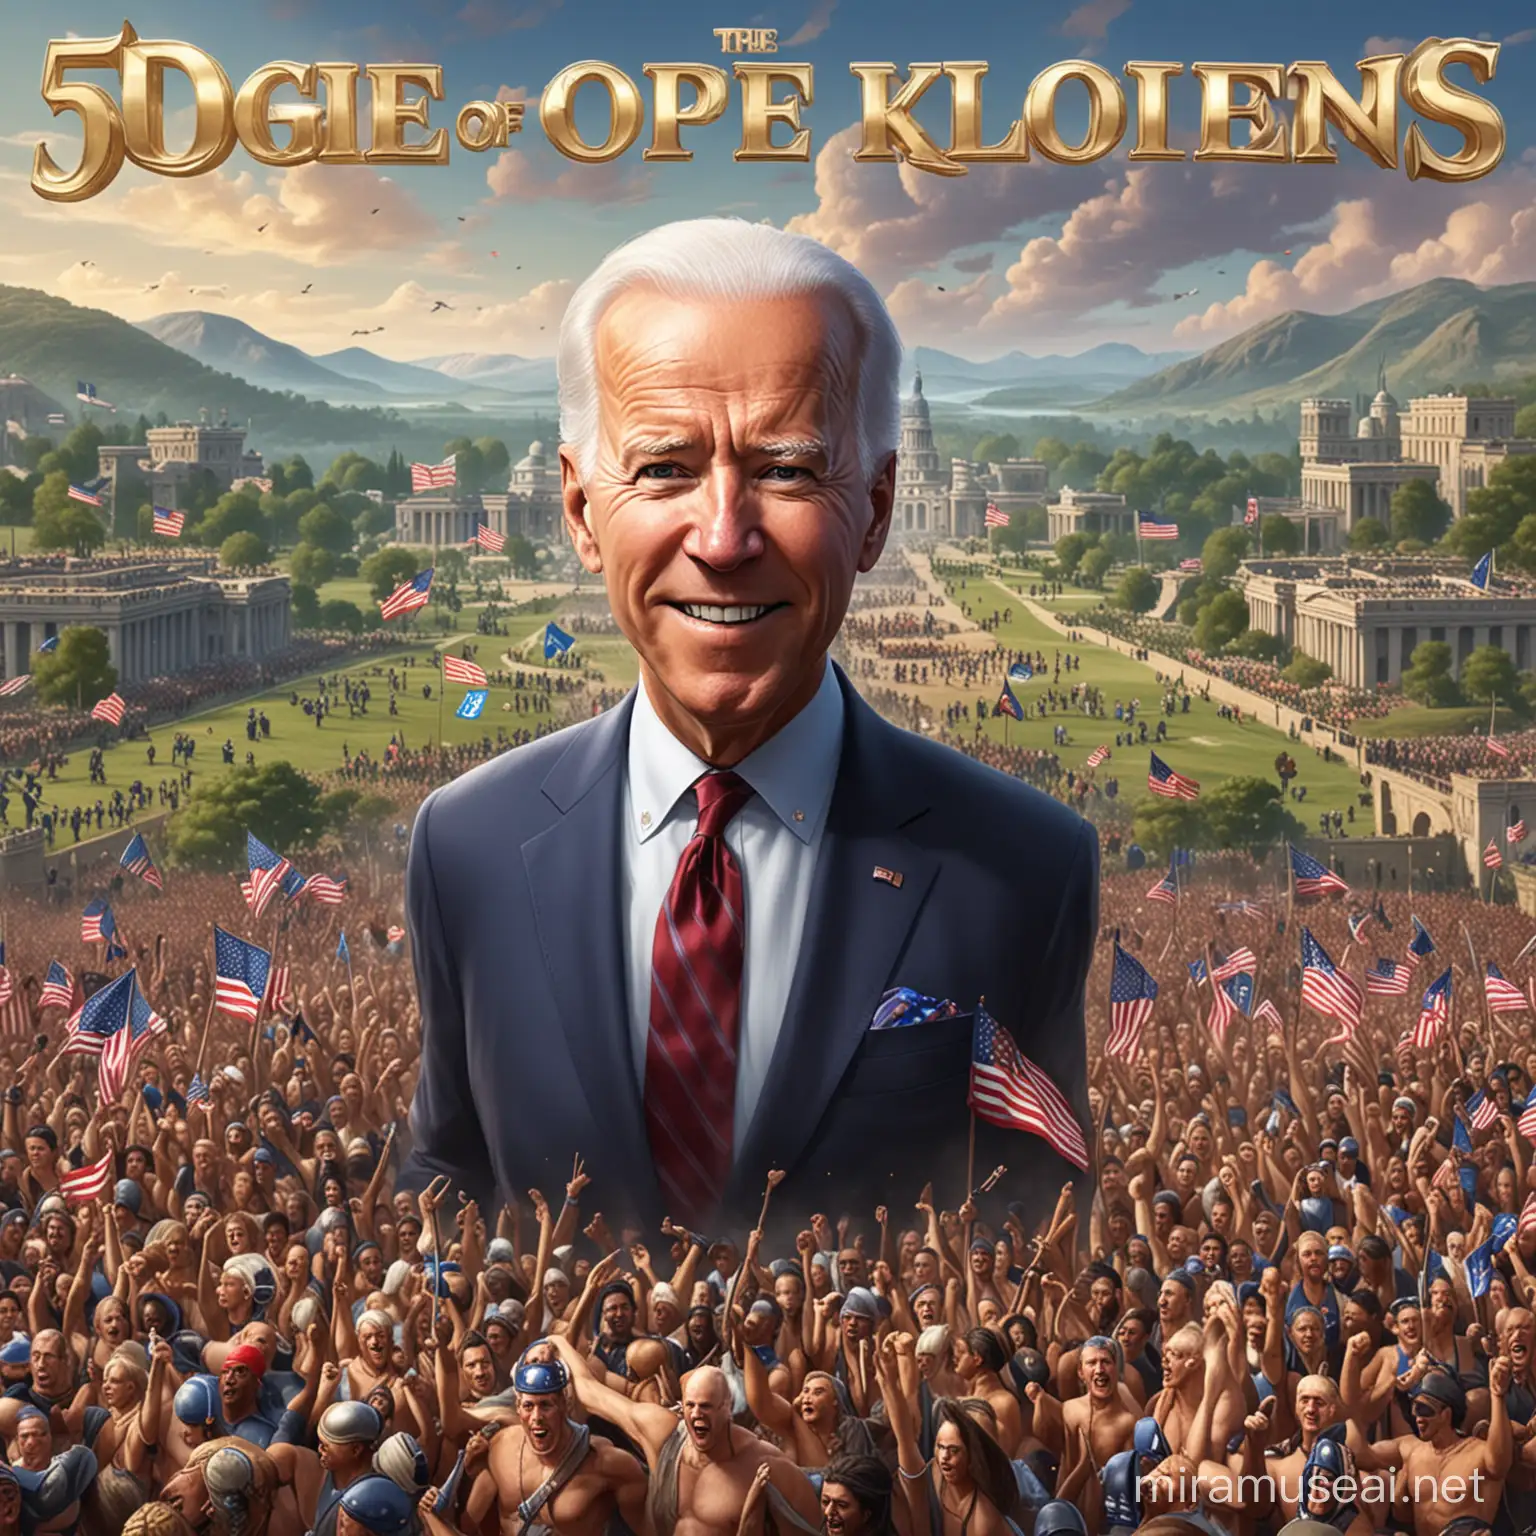 Joe Biden Leads with 50 Million Power in Rise of Kingdoms Strategy Game